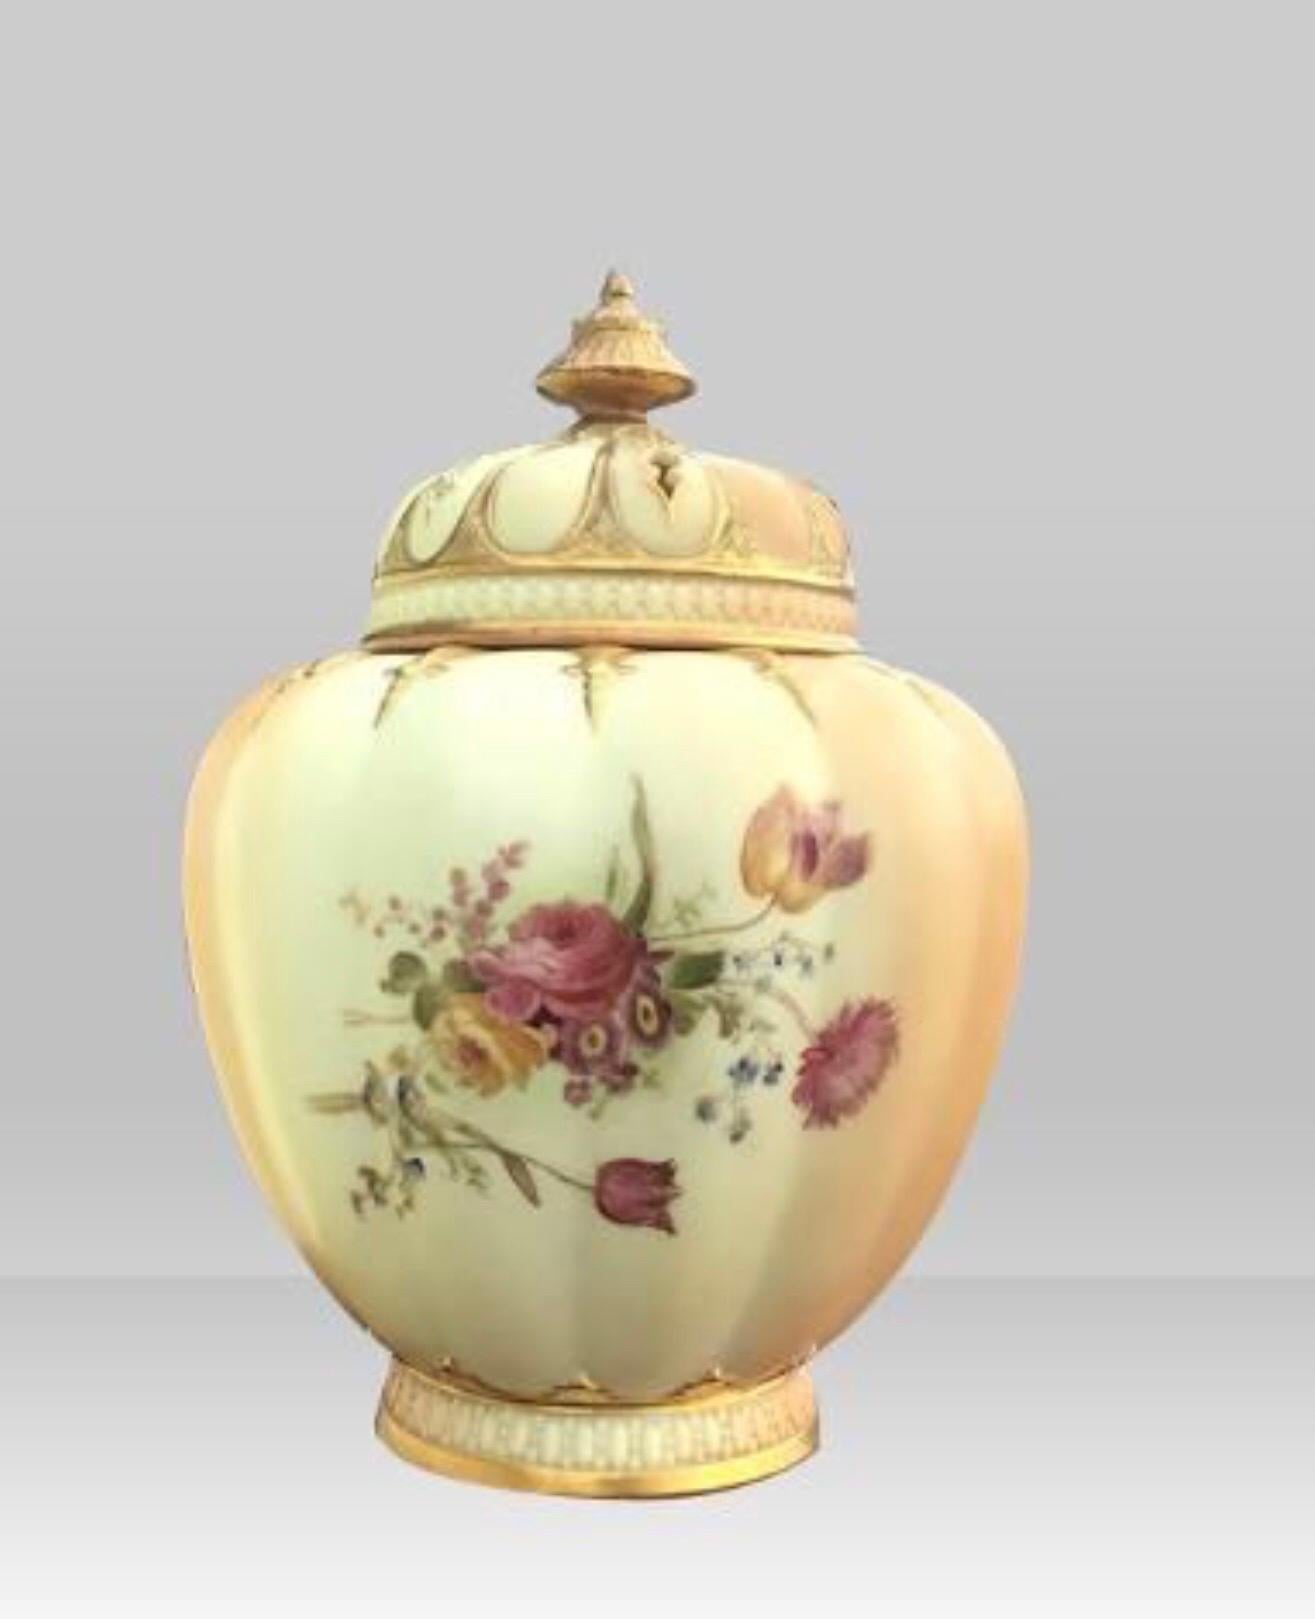 Antique Royal Worcester blush ivory pot pourri ase,
Complete with inner Lid.
Dome Cover,
Painted Flowers and foliage.
Shape number 1312
Dated 1914
Measures: 27cm x 18cm diameter.